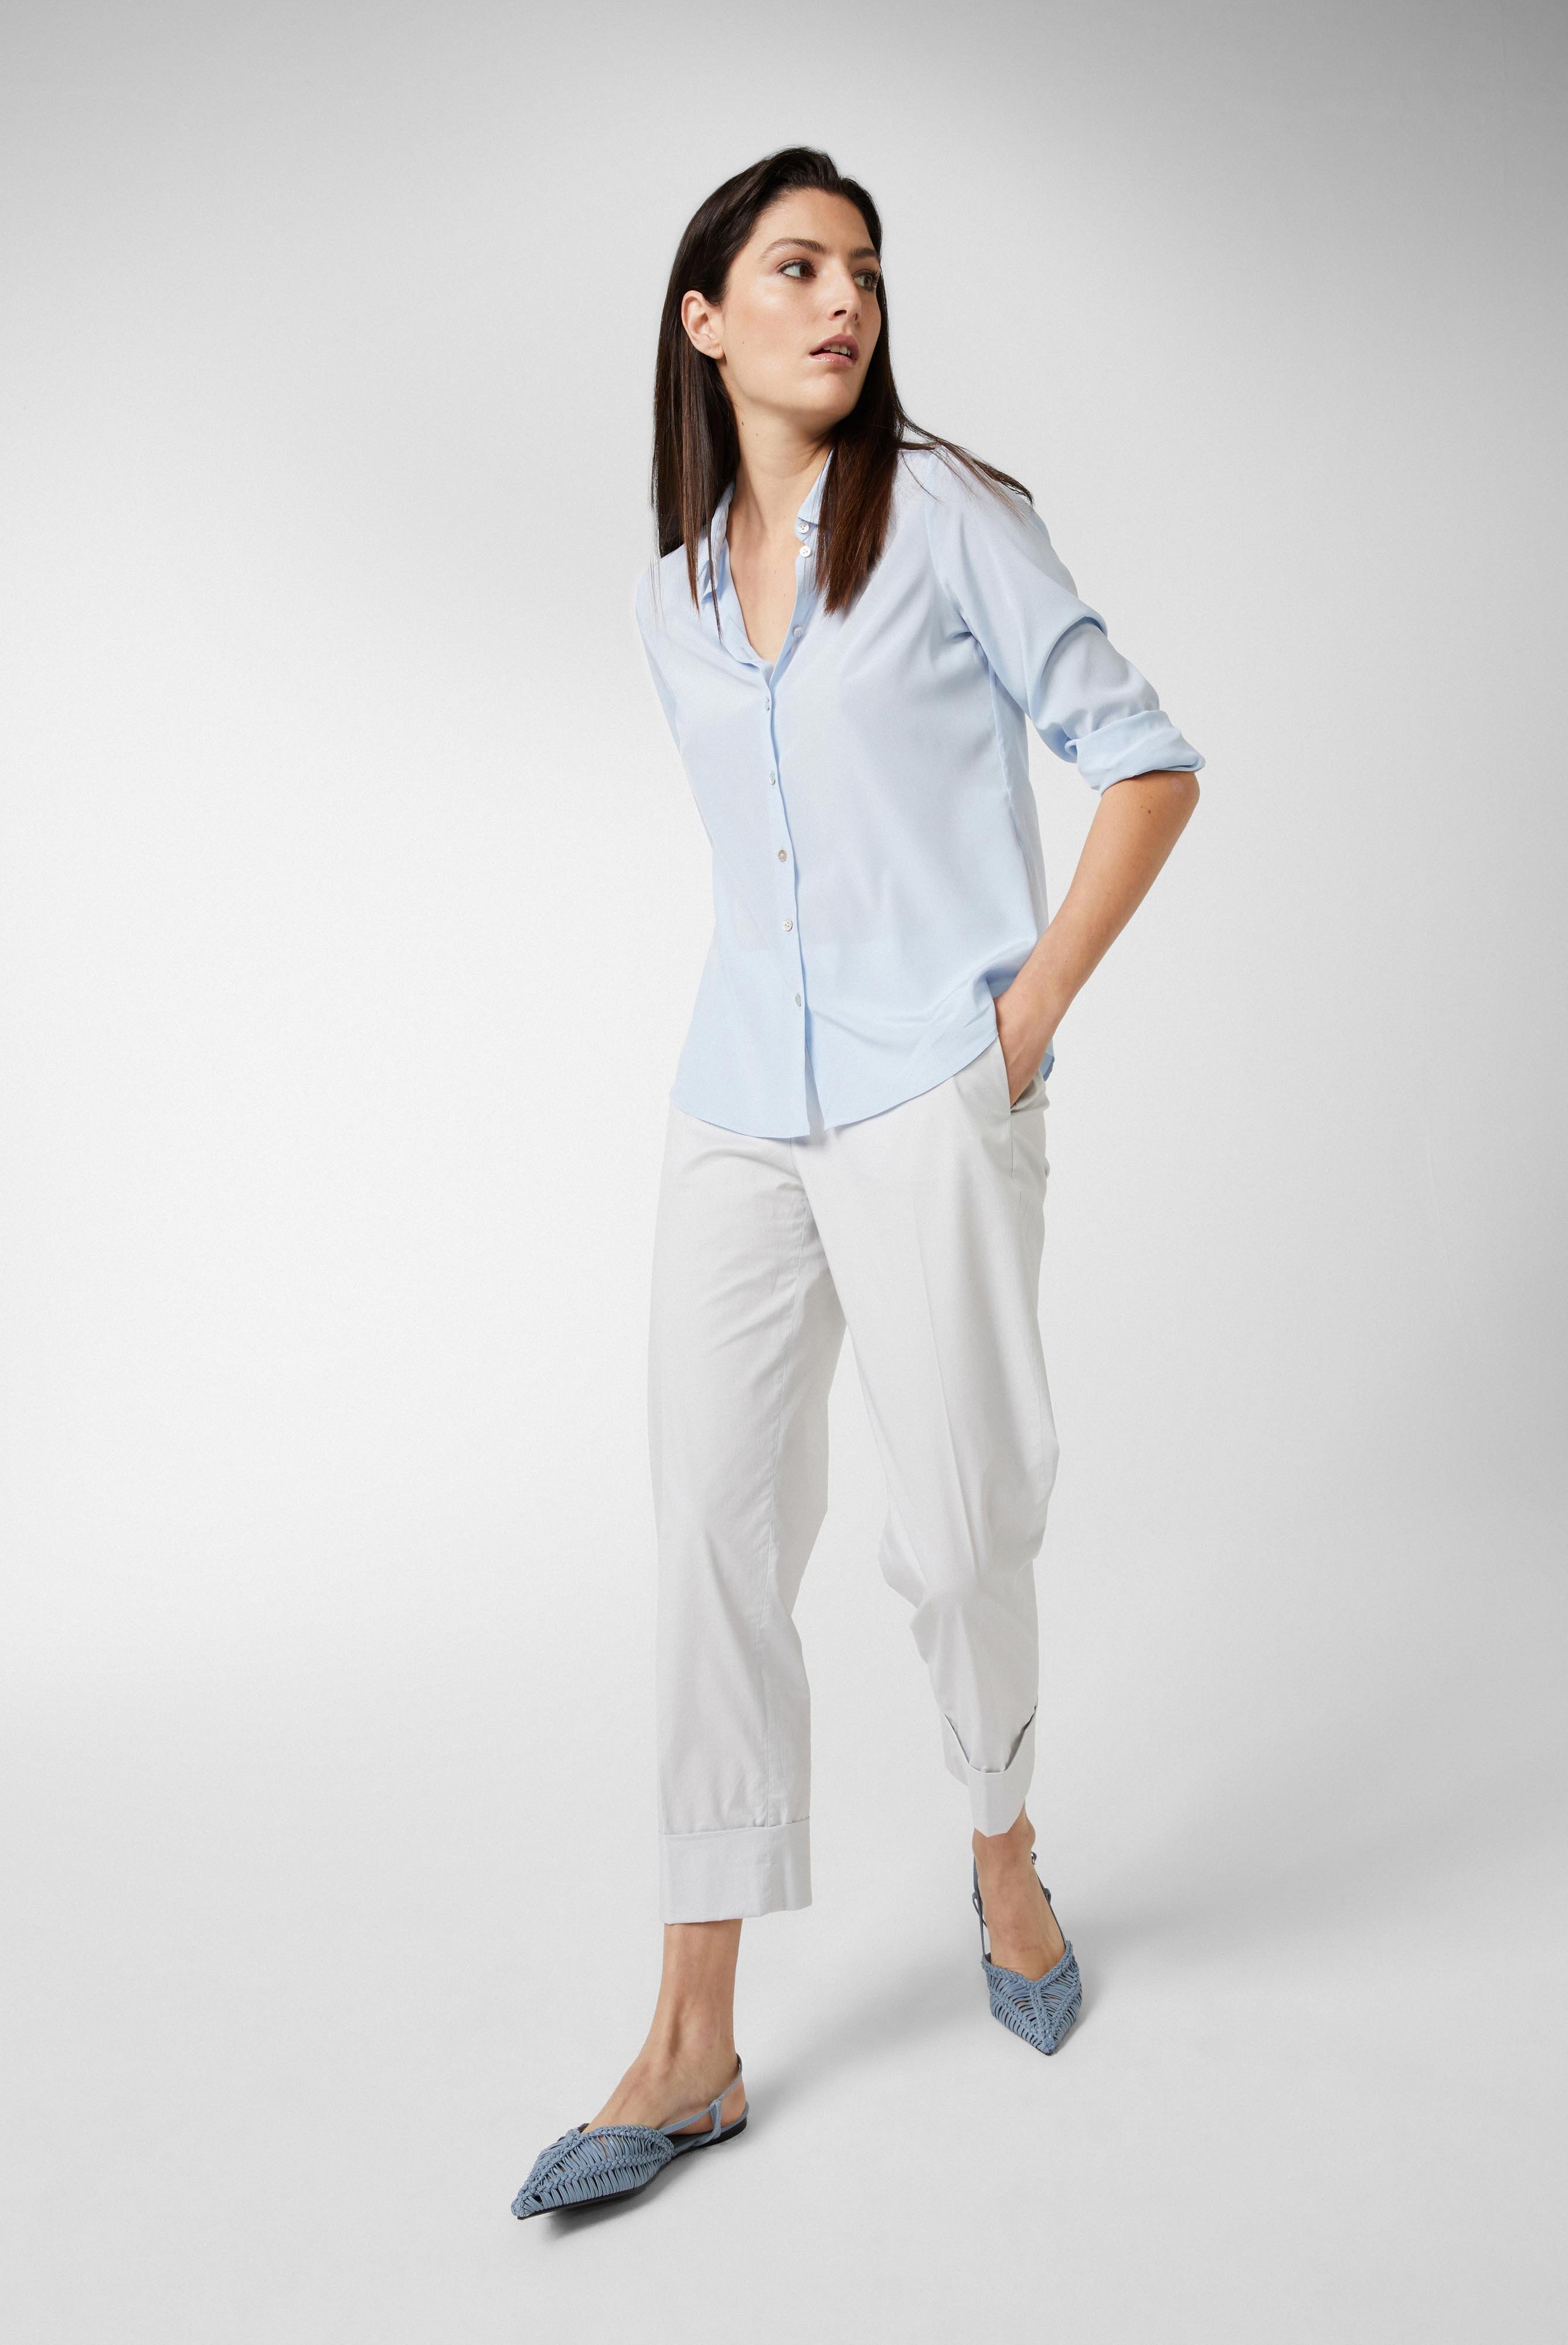 Business Blouses+Shirt with silk and stretch+05.511Z.07.155553.713.38